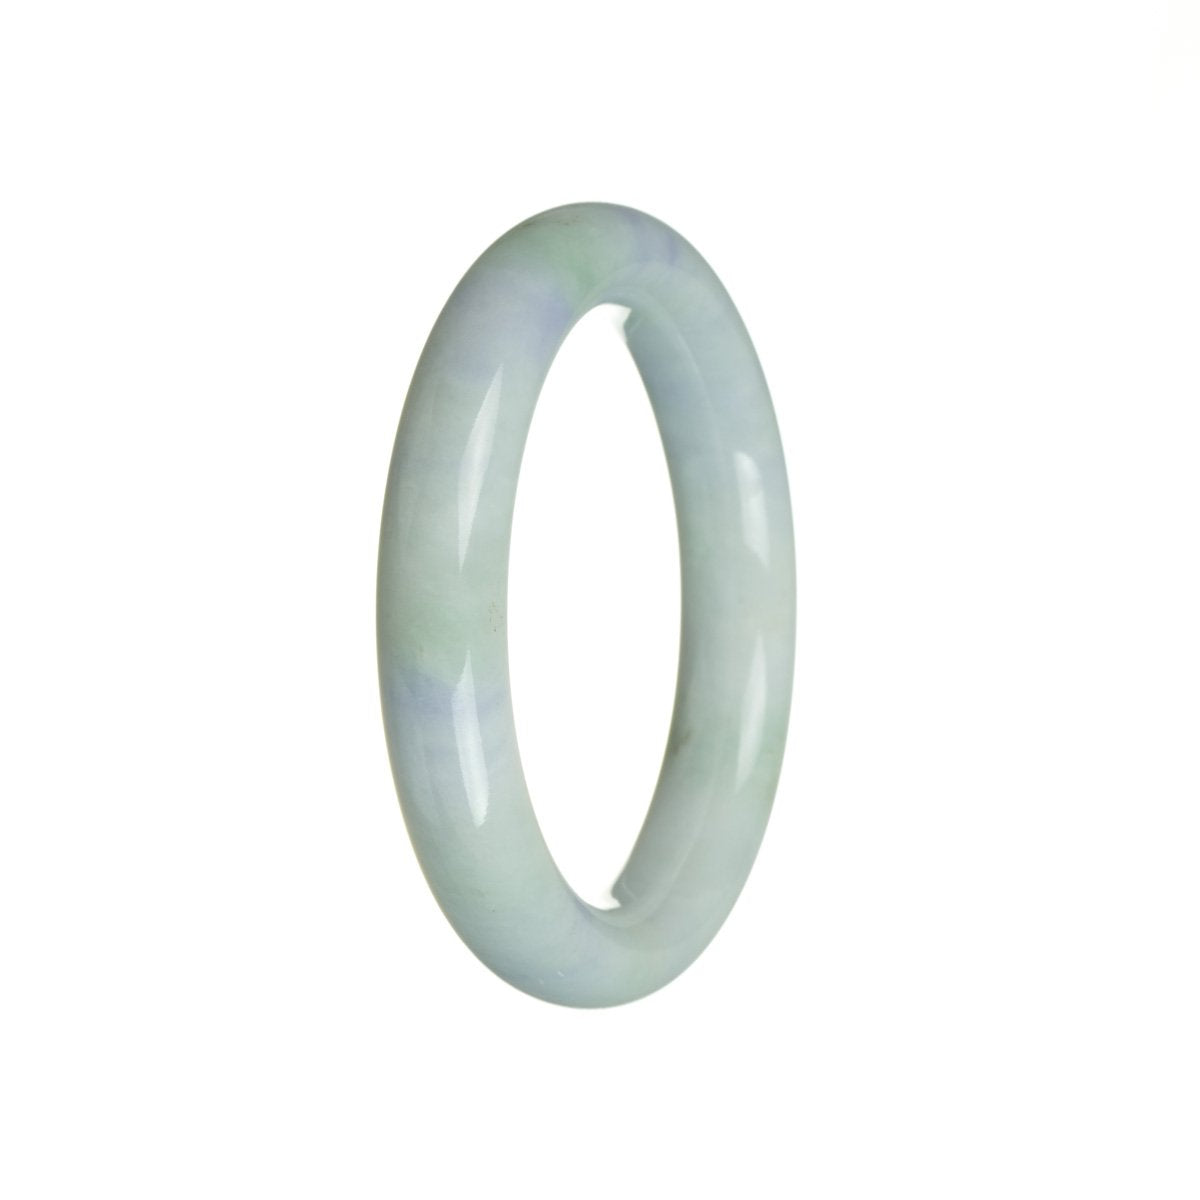 A round bracelet made of authentic Grade A lavender with green Burma jade beads, measuring 56mm in diameter.